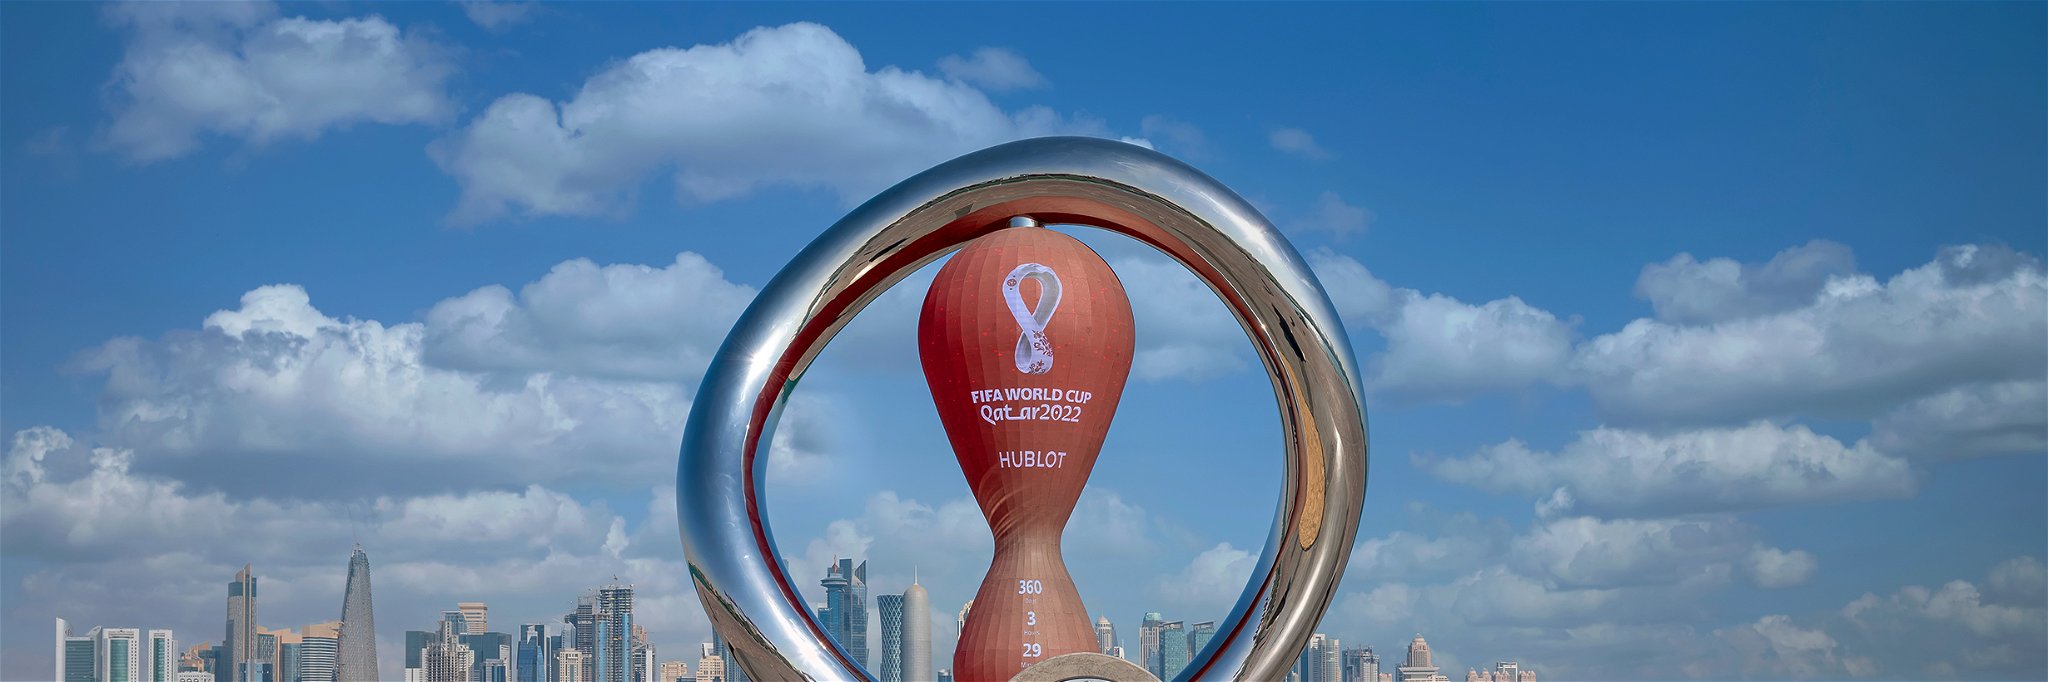 Countdown clock for the World Cup 2022 at Doha, Qatar.